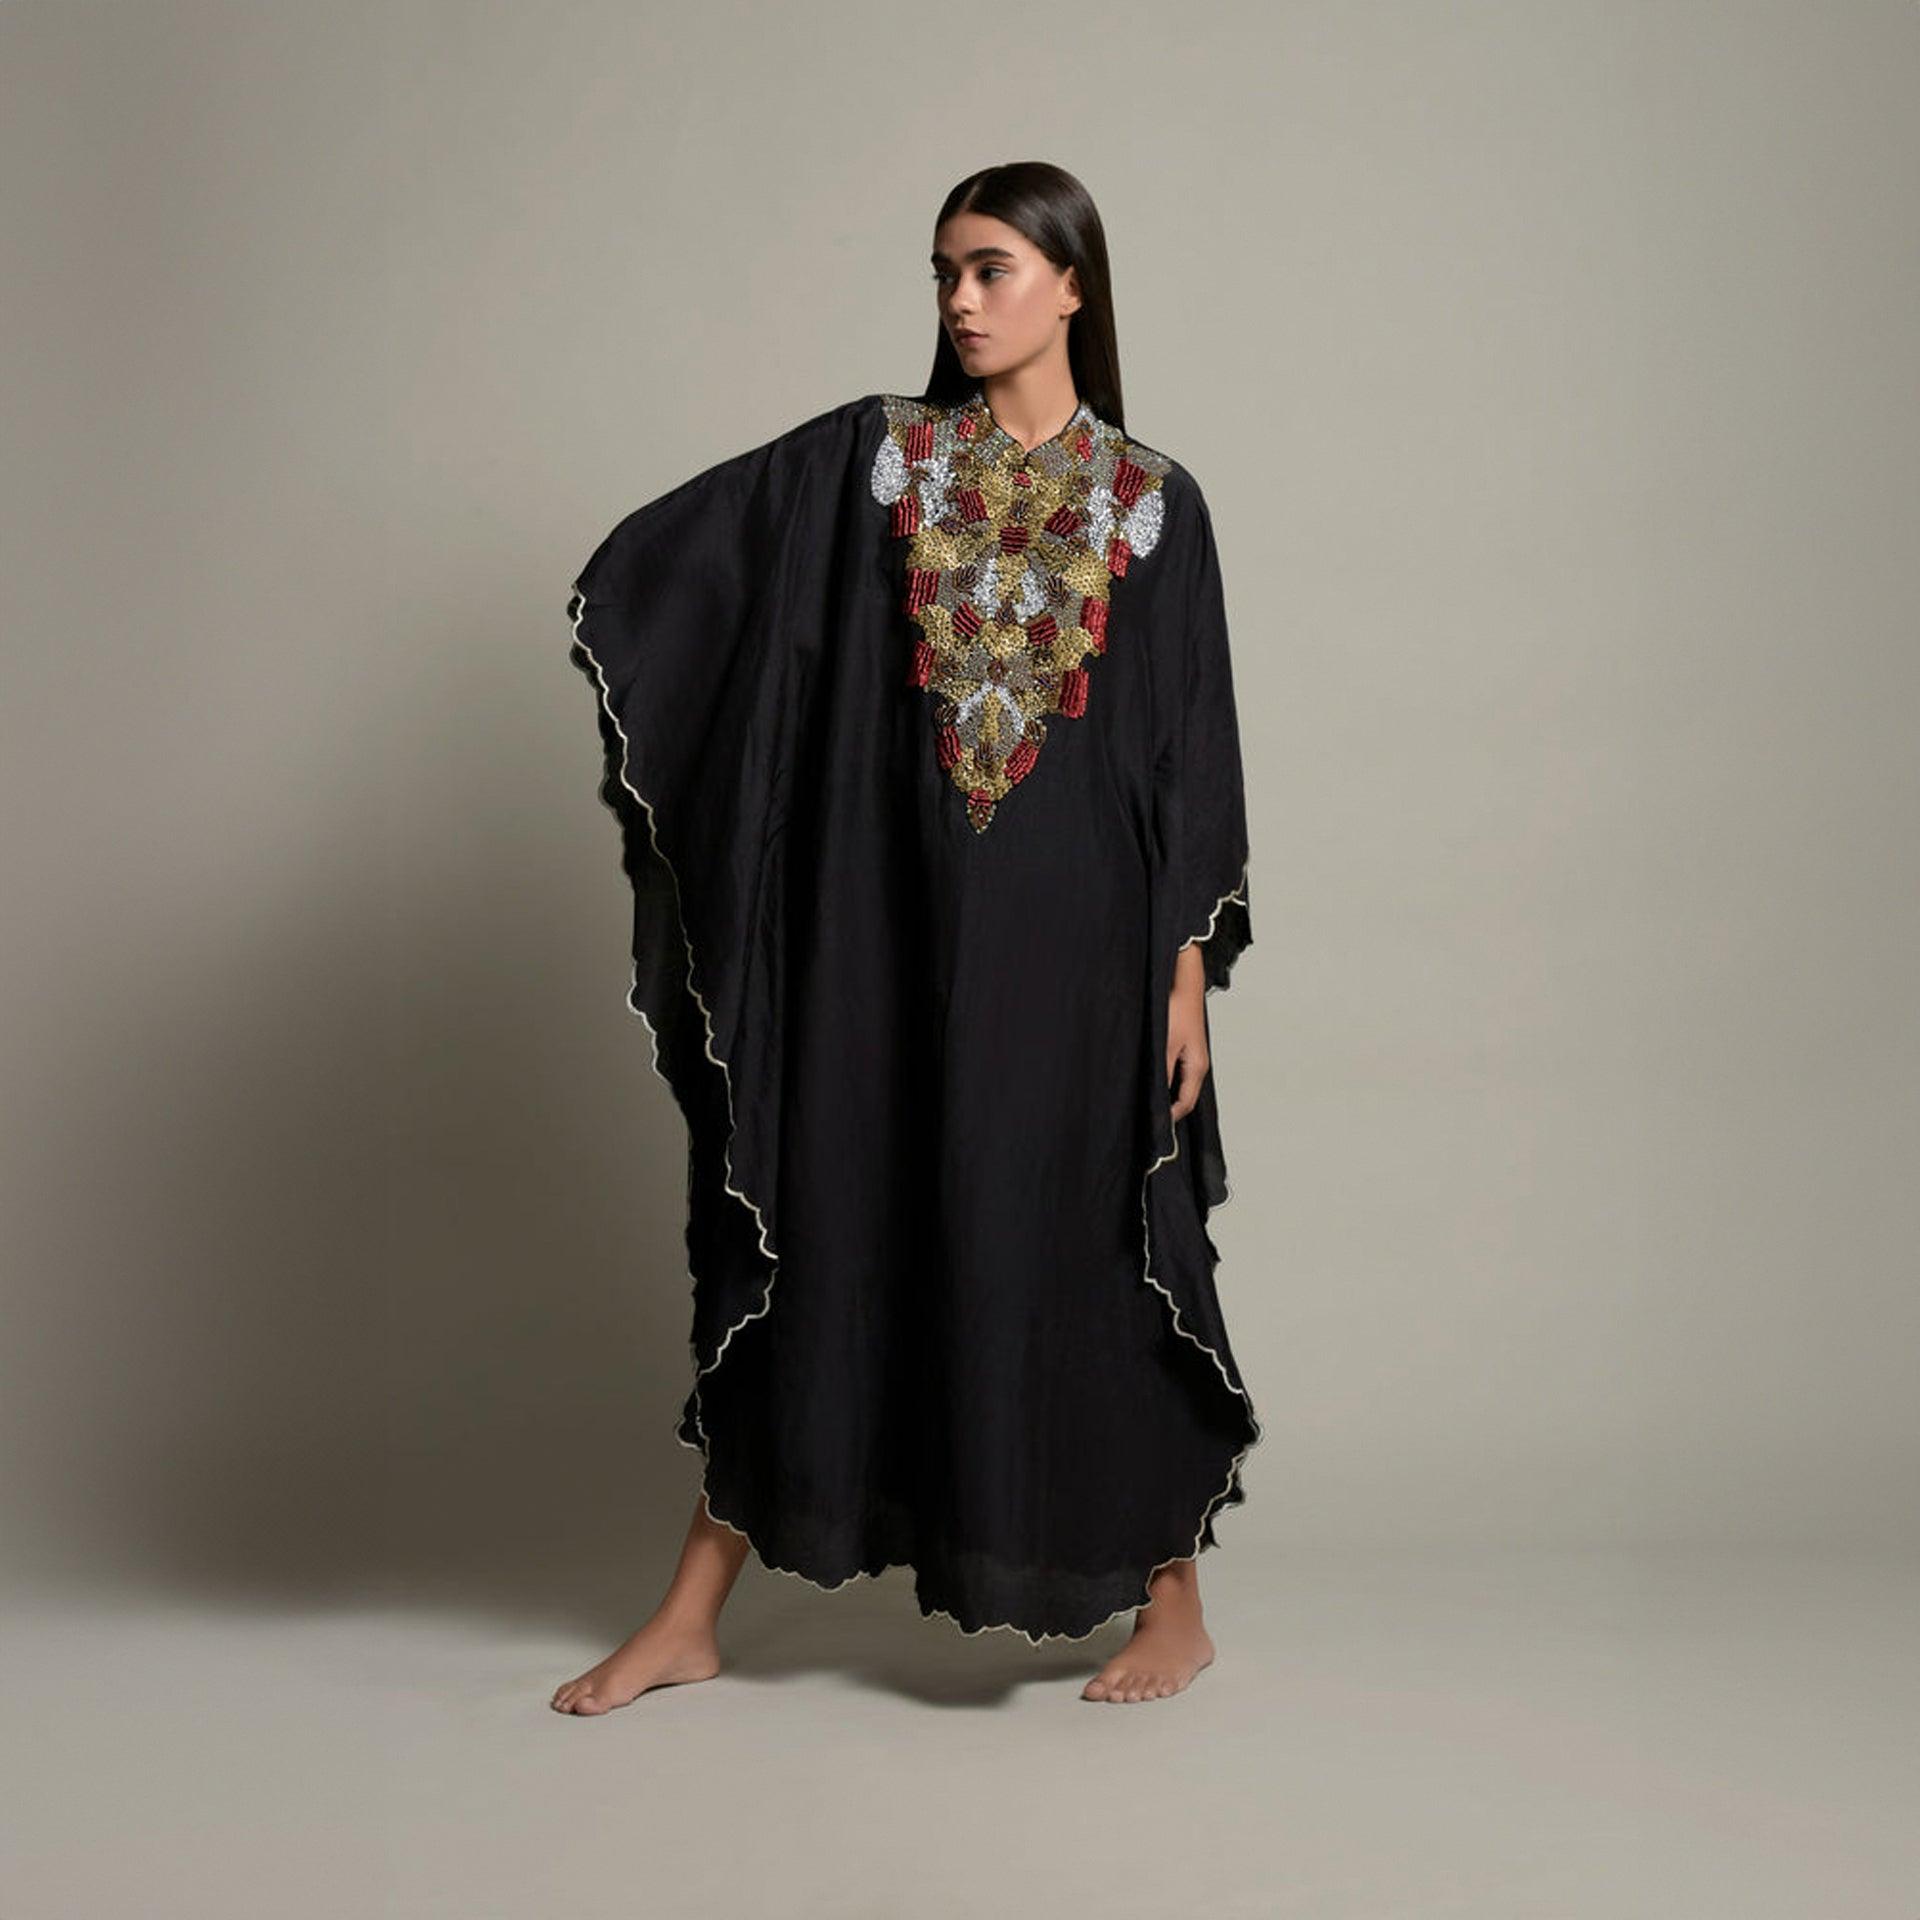 Black Mehram Embellished Jalabiya with Inner Cotton Cami From Amore Mio By Hitu - WECRE8